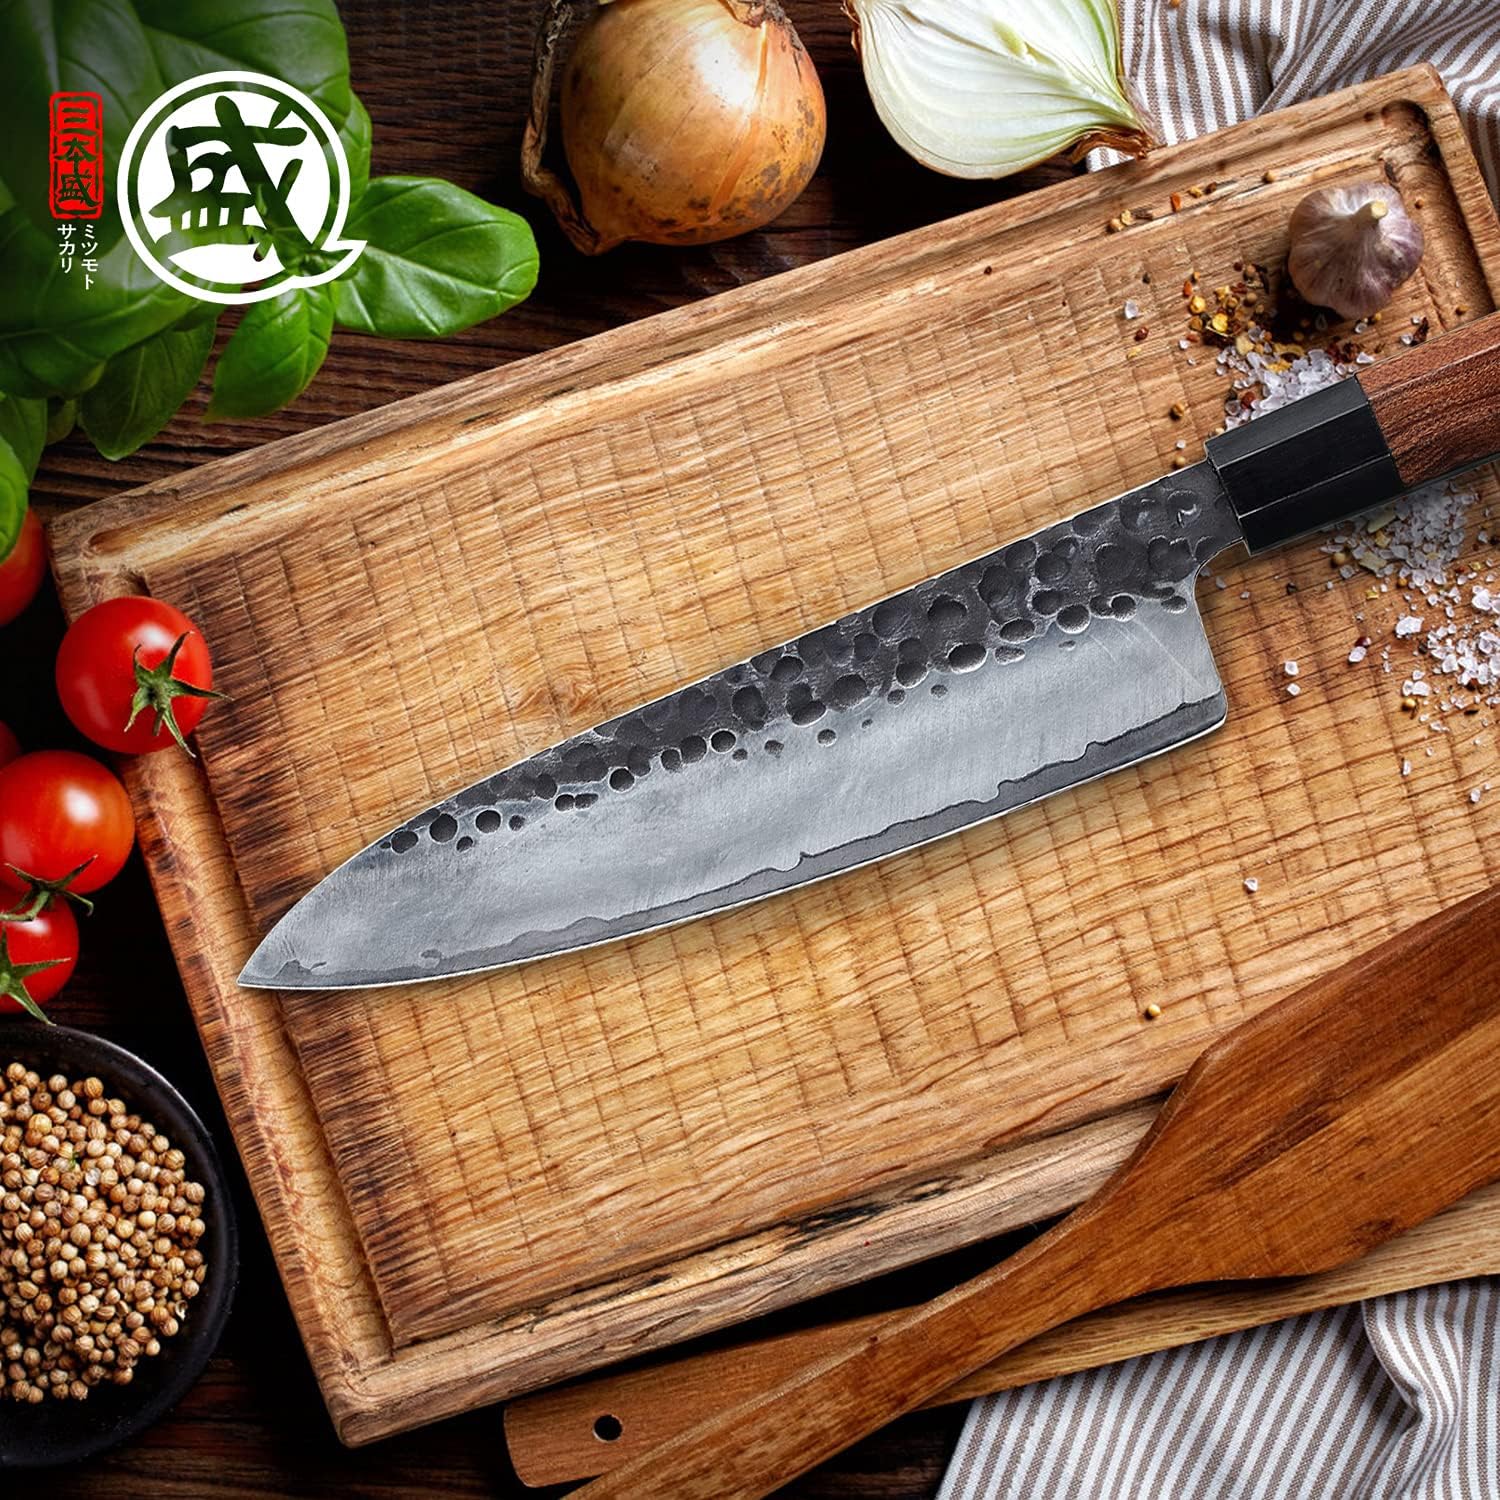 8 Inch Japanese Gyuto Chef Knife, Professional Hand Forged Kitchen Chef Knife, 3 Layers 9CR18MOV High Carbon Meat Sushi Knife (Rosewood Handle & Gift Box)